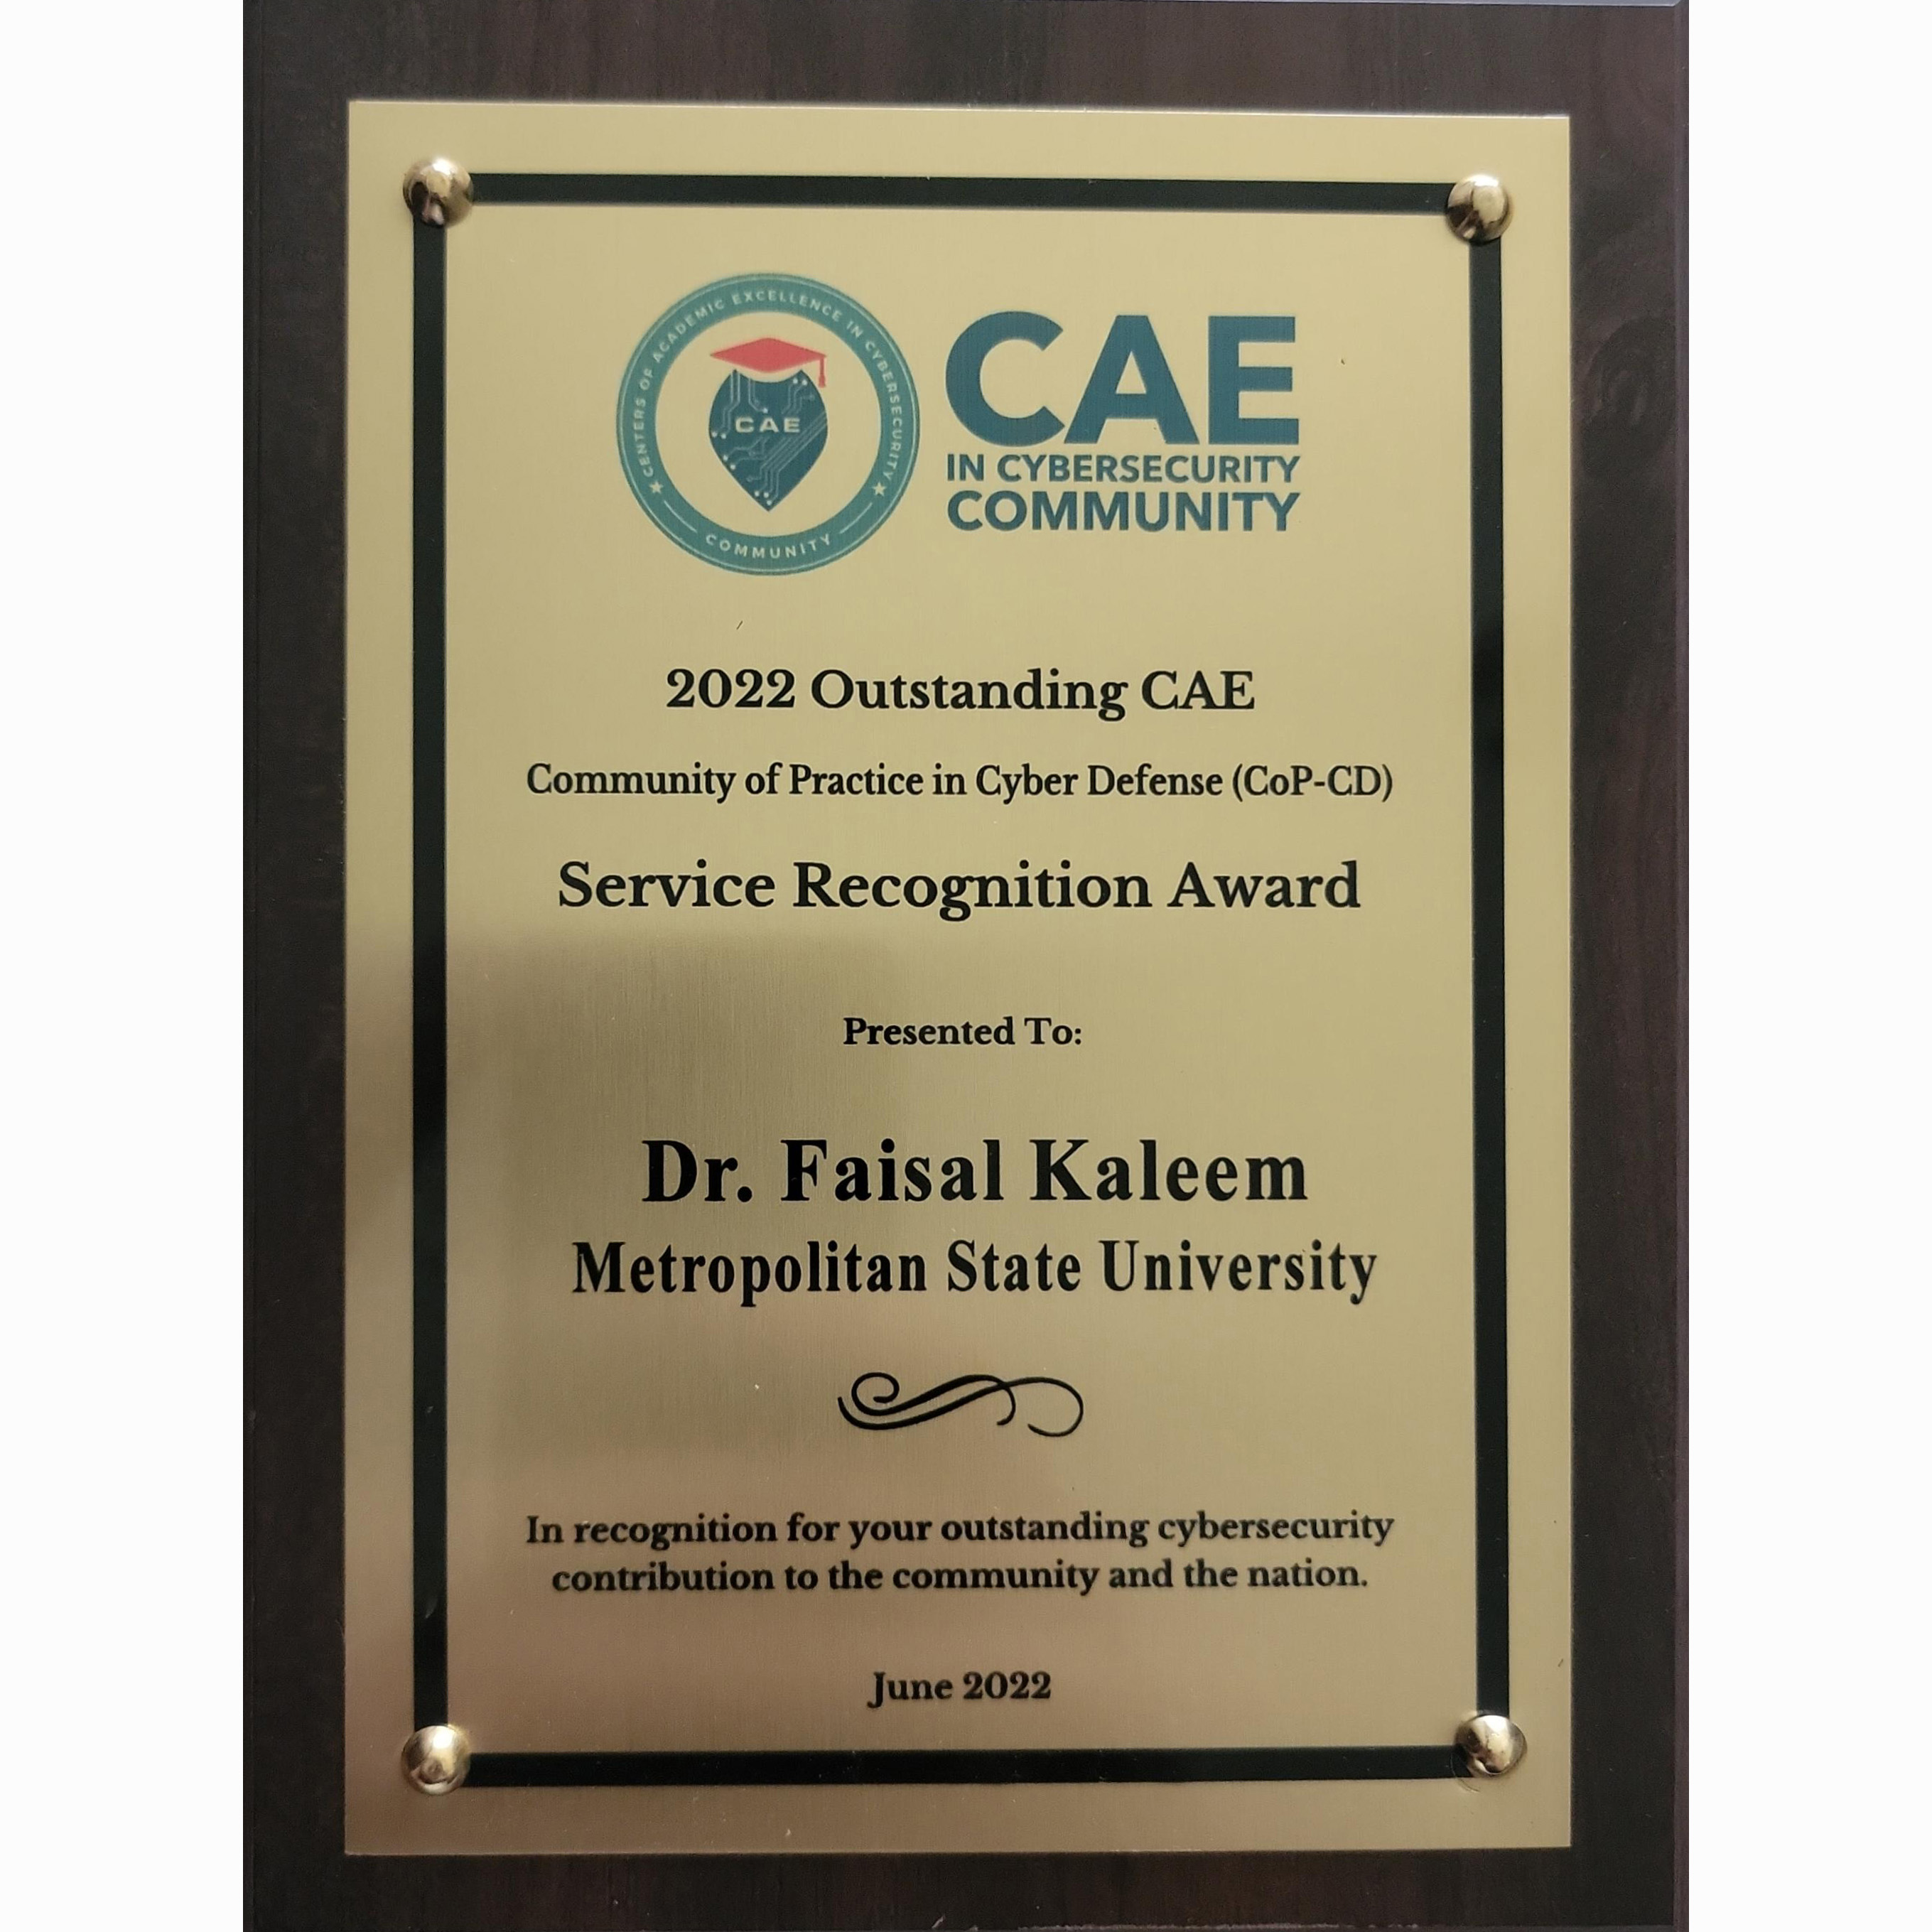 An image of a CAE in Cybersecurity Community plaque honoring Dr. Faisal Kaleem with a 2022 Outstanding CAE Service Recognition award